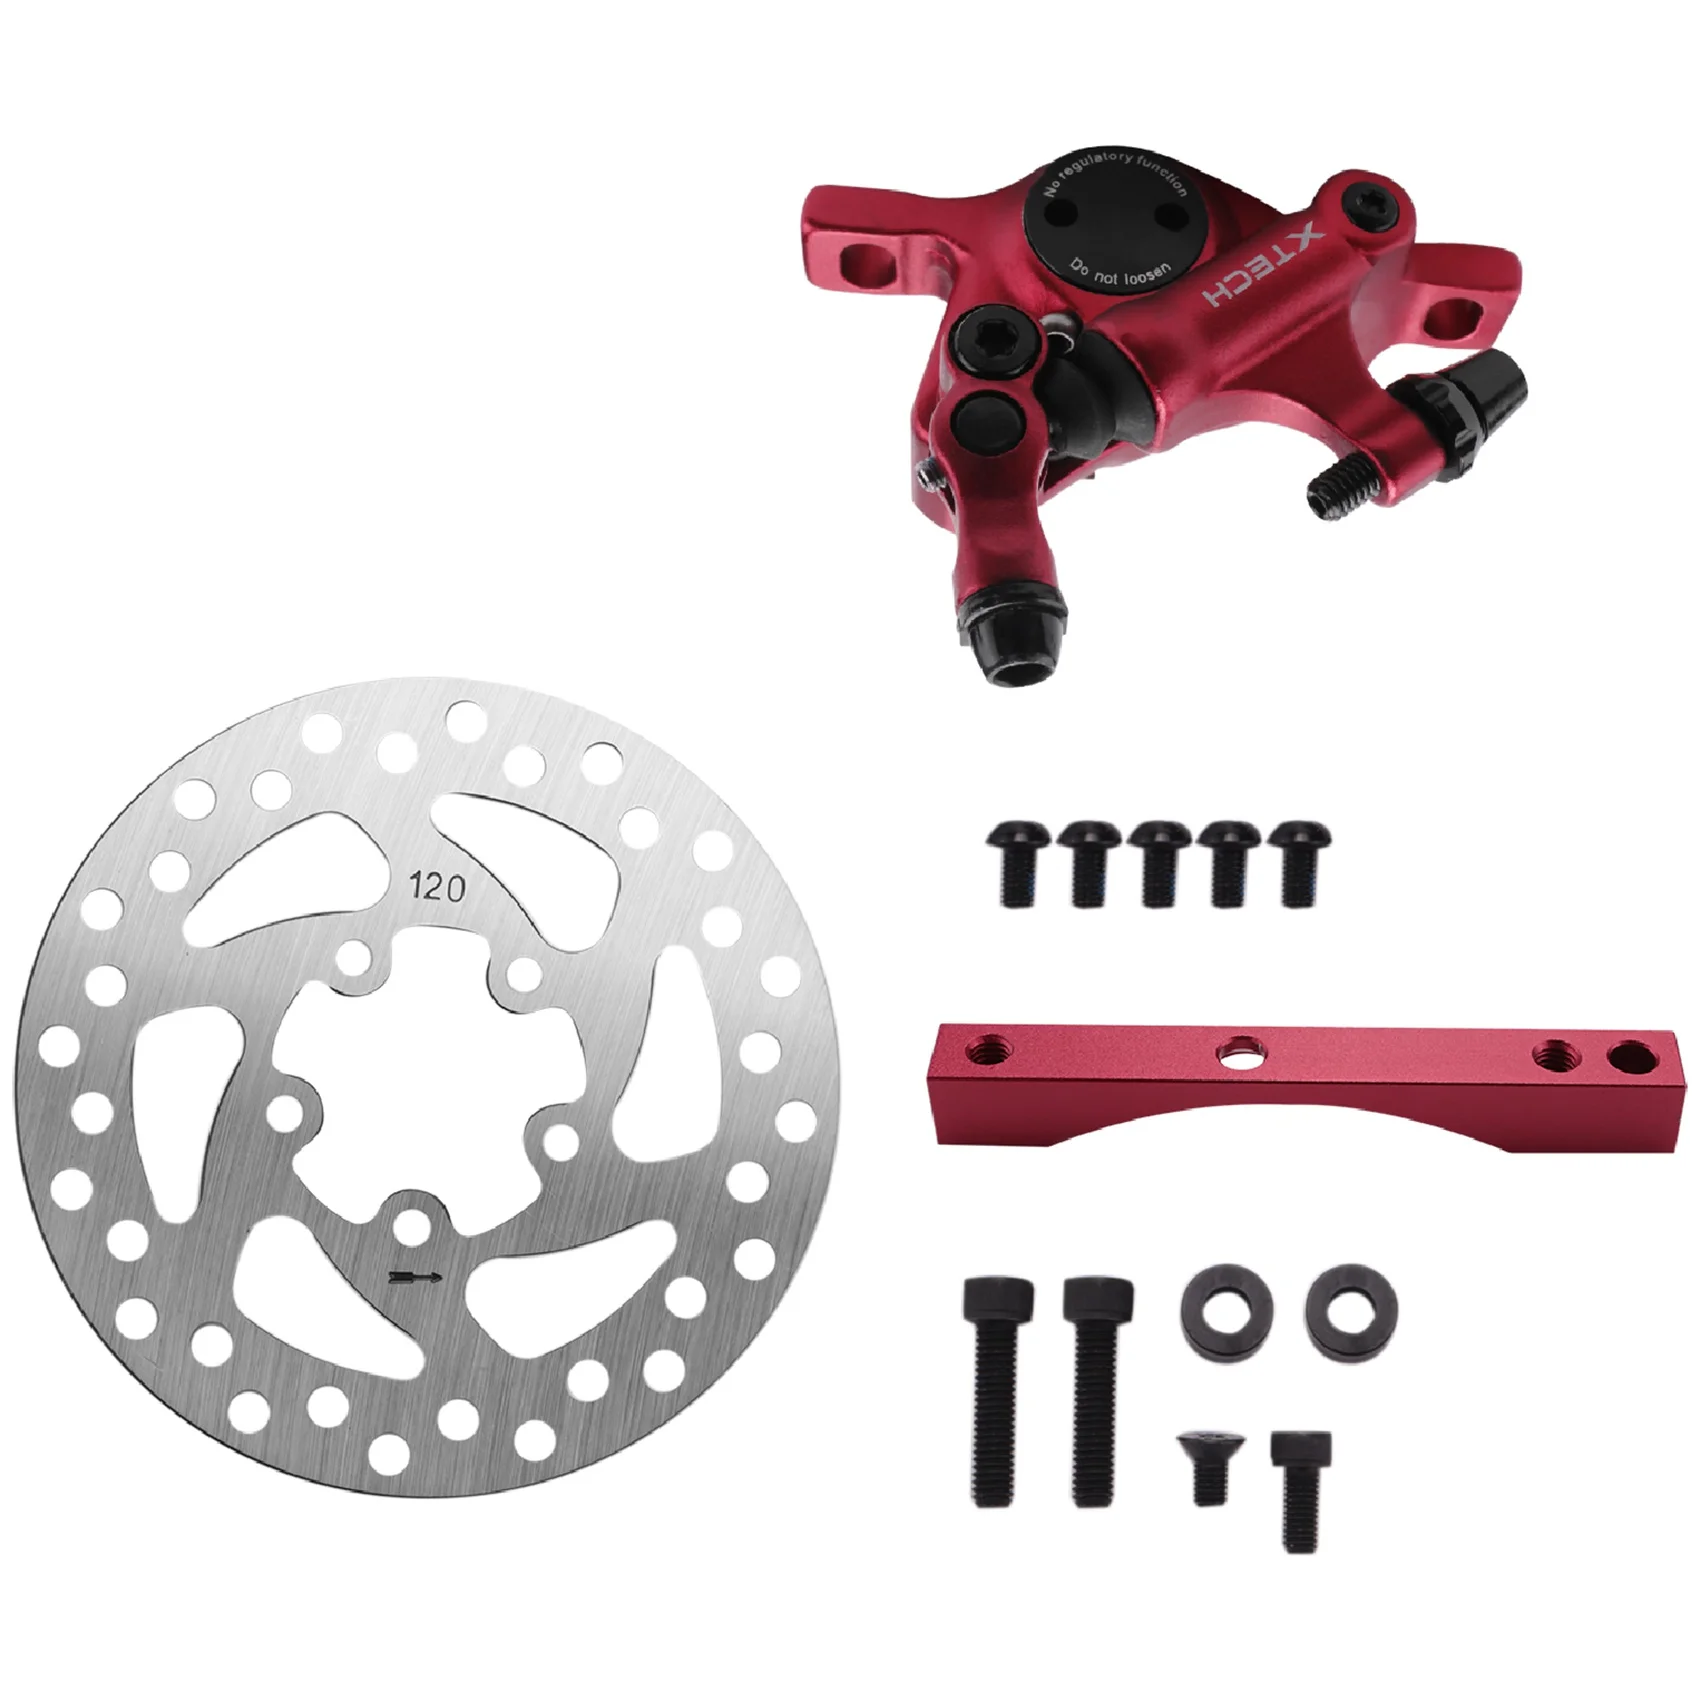 

Electric Scooter Hydraulic Brake Adapter Kit Aluminum Disk Brakes Disc Piston Parts for Xiaomi M365 Pro Red